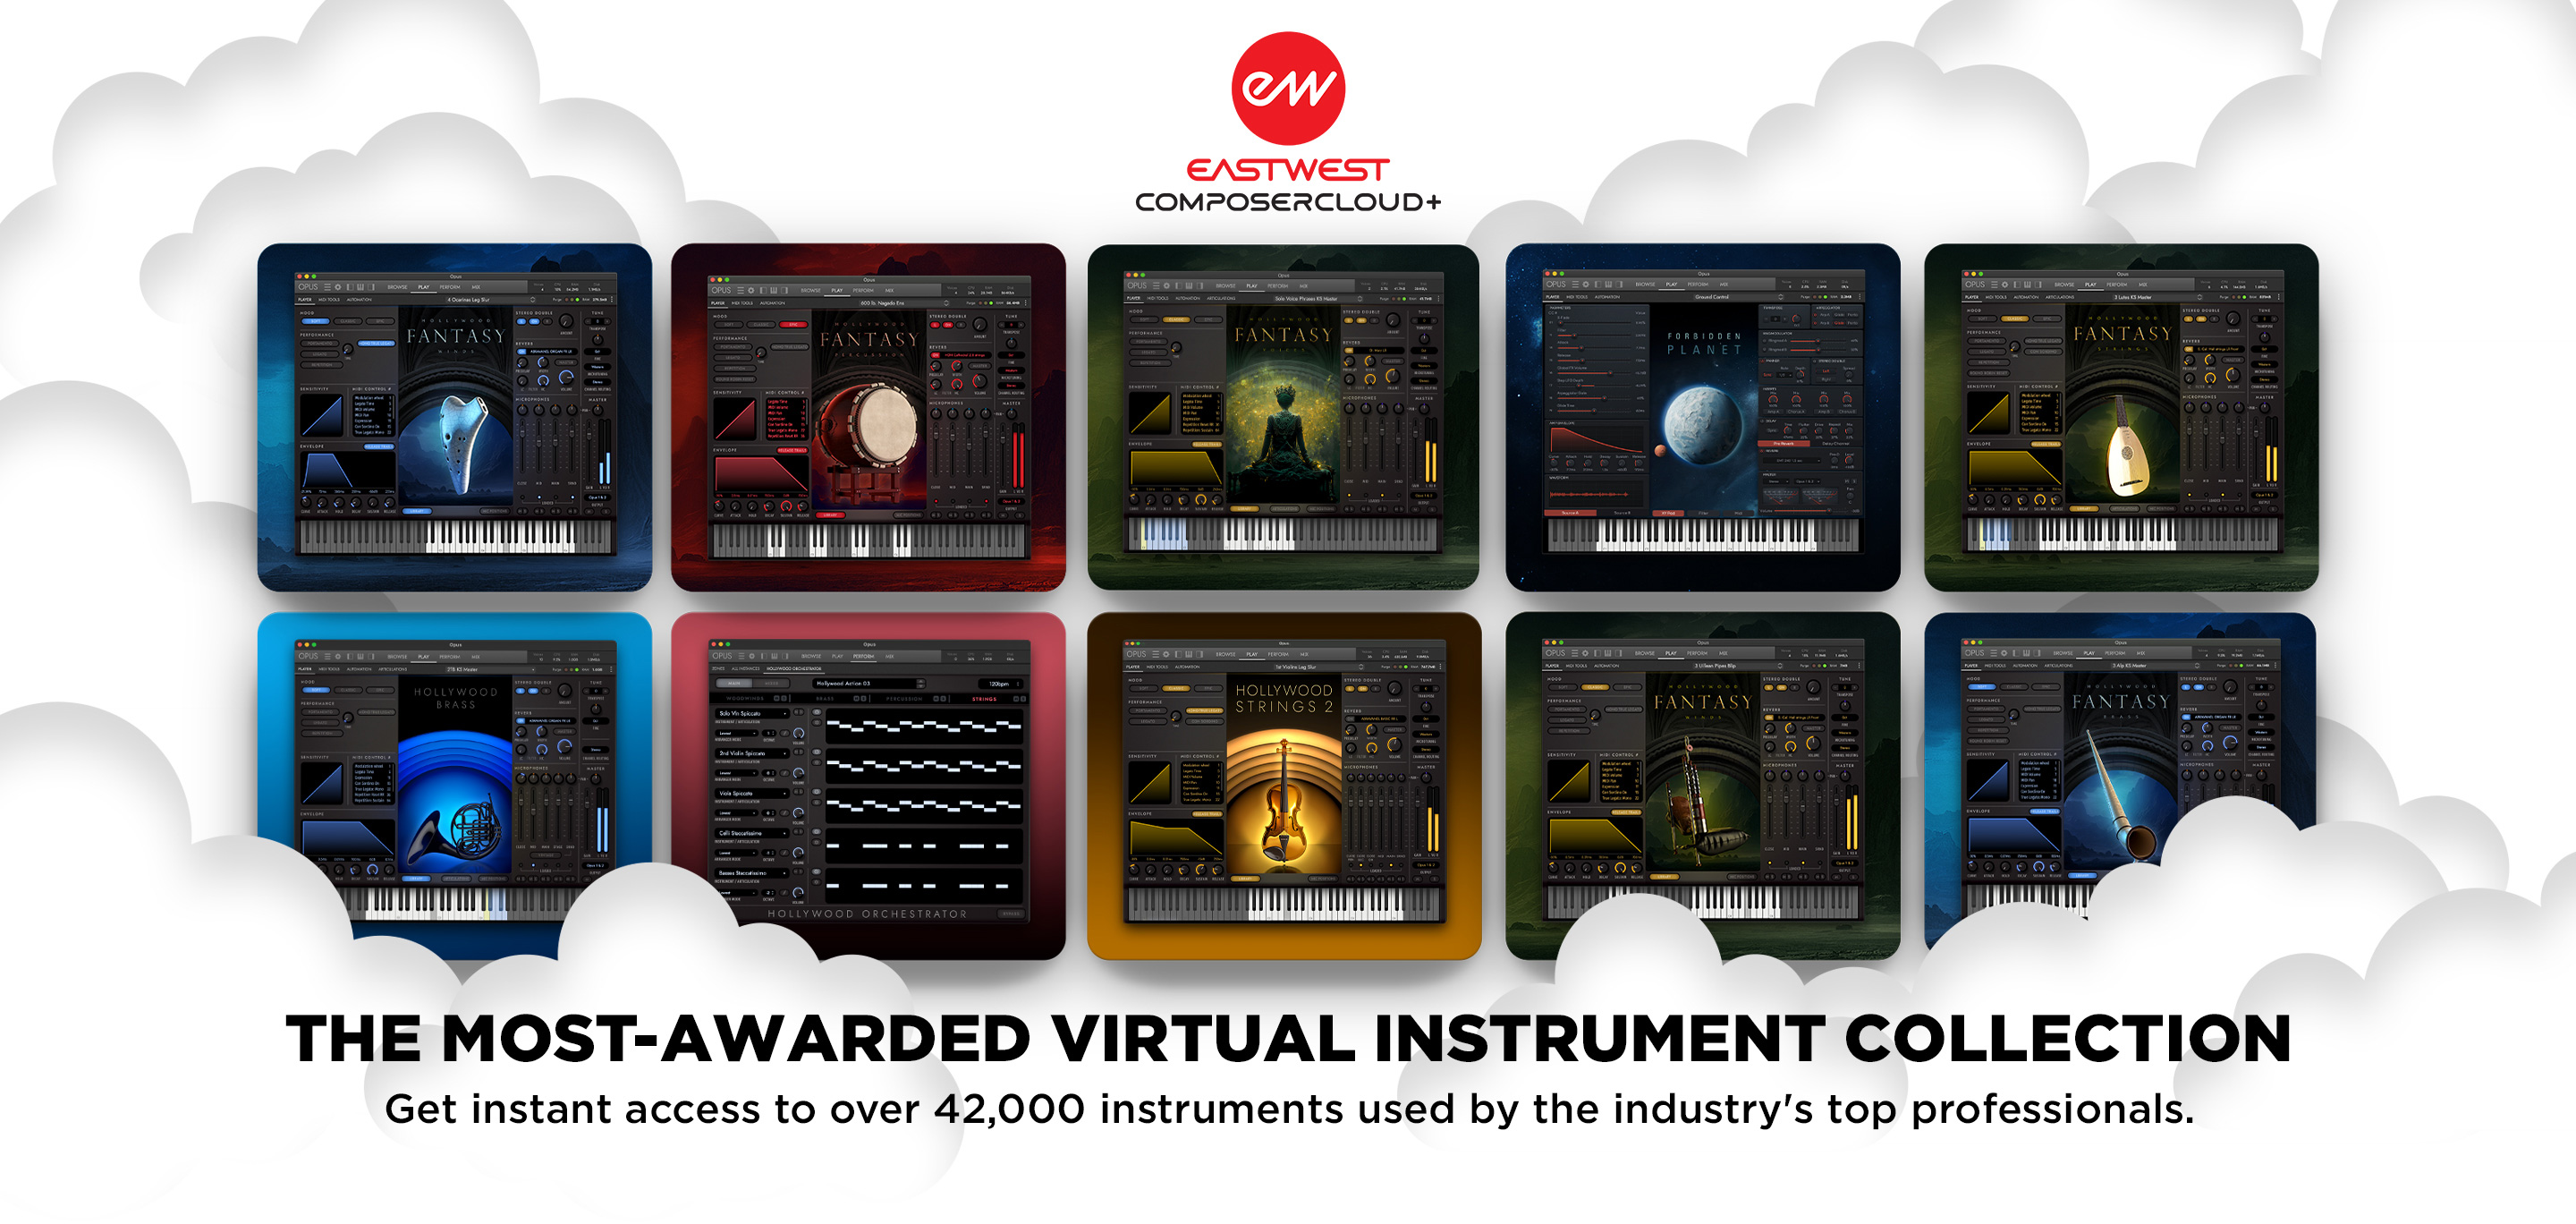 EastWest ComposerCloud+ - The Most Awarded Virtual Instrument Collection